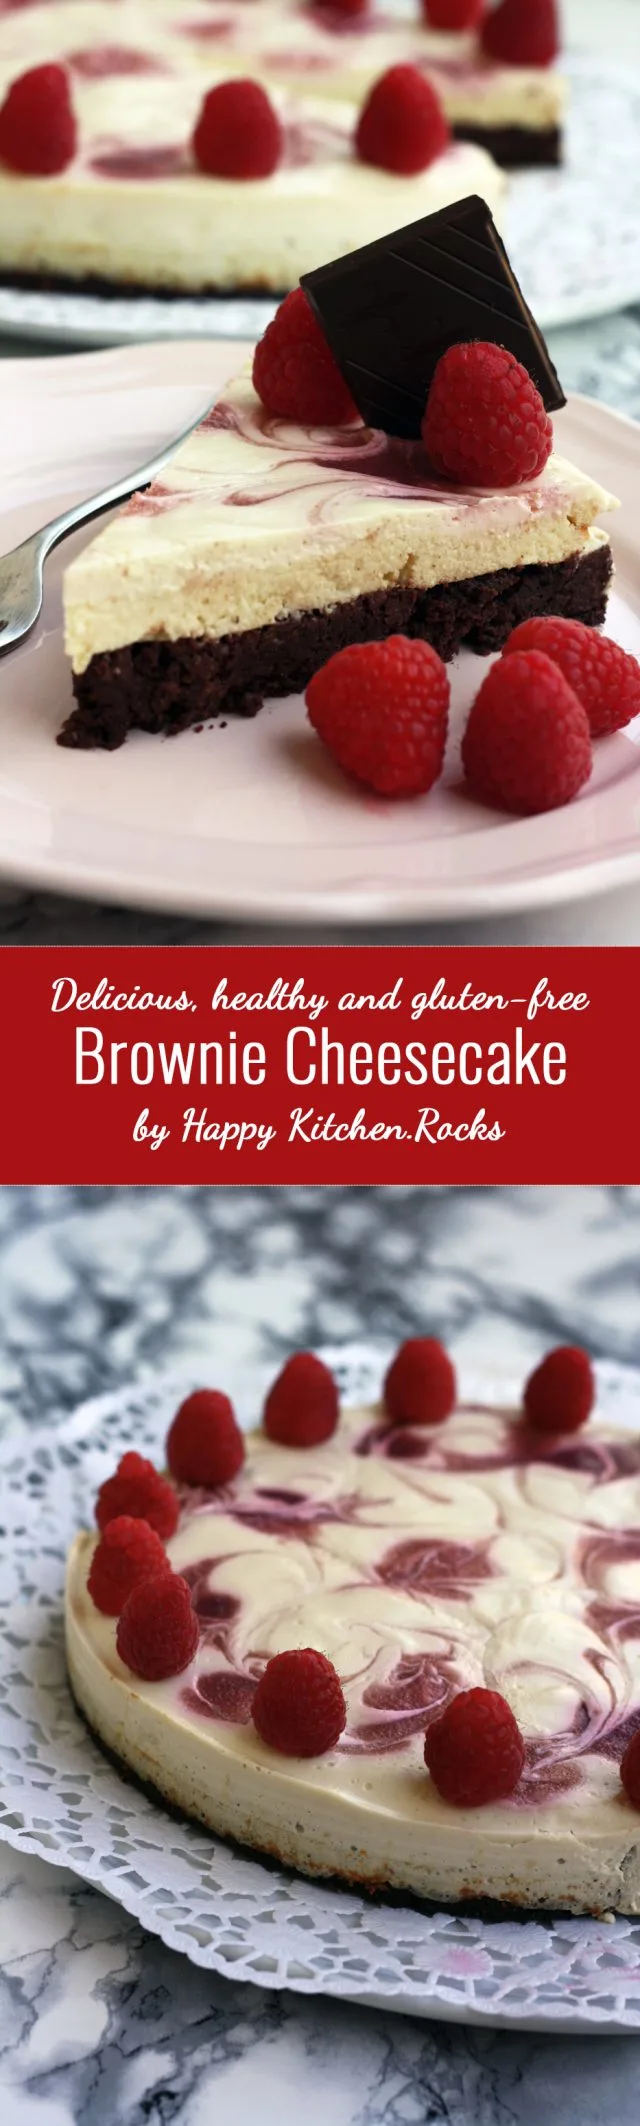 Healthy Brownie Cheesecake Super Long Collage with Text Overlay